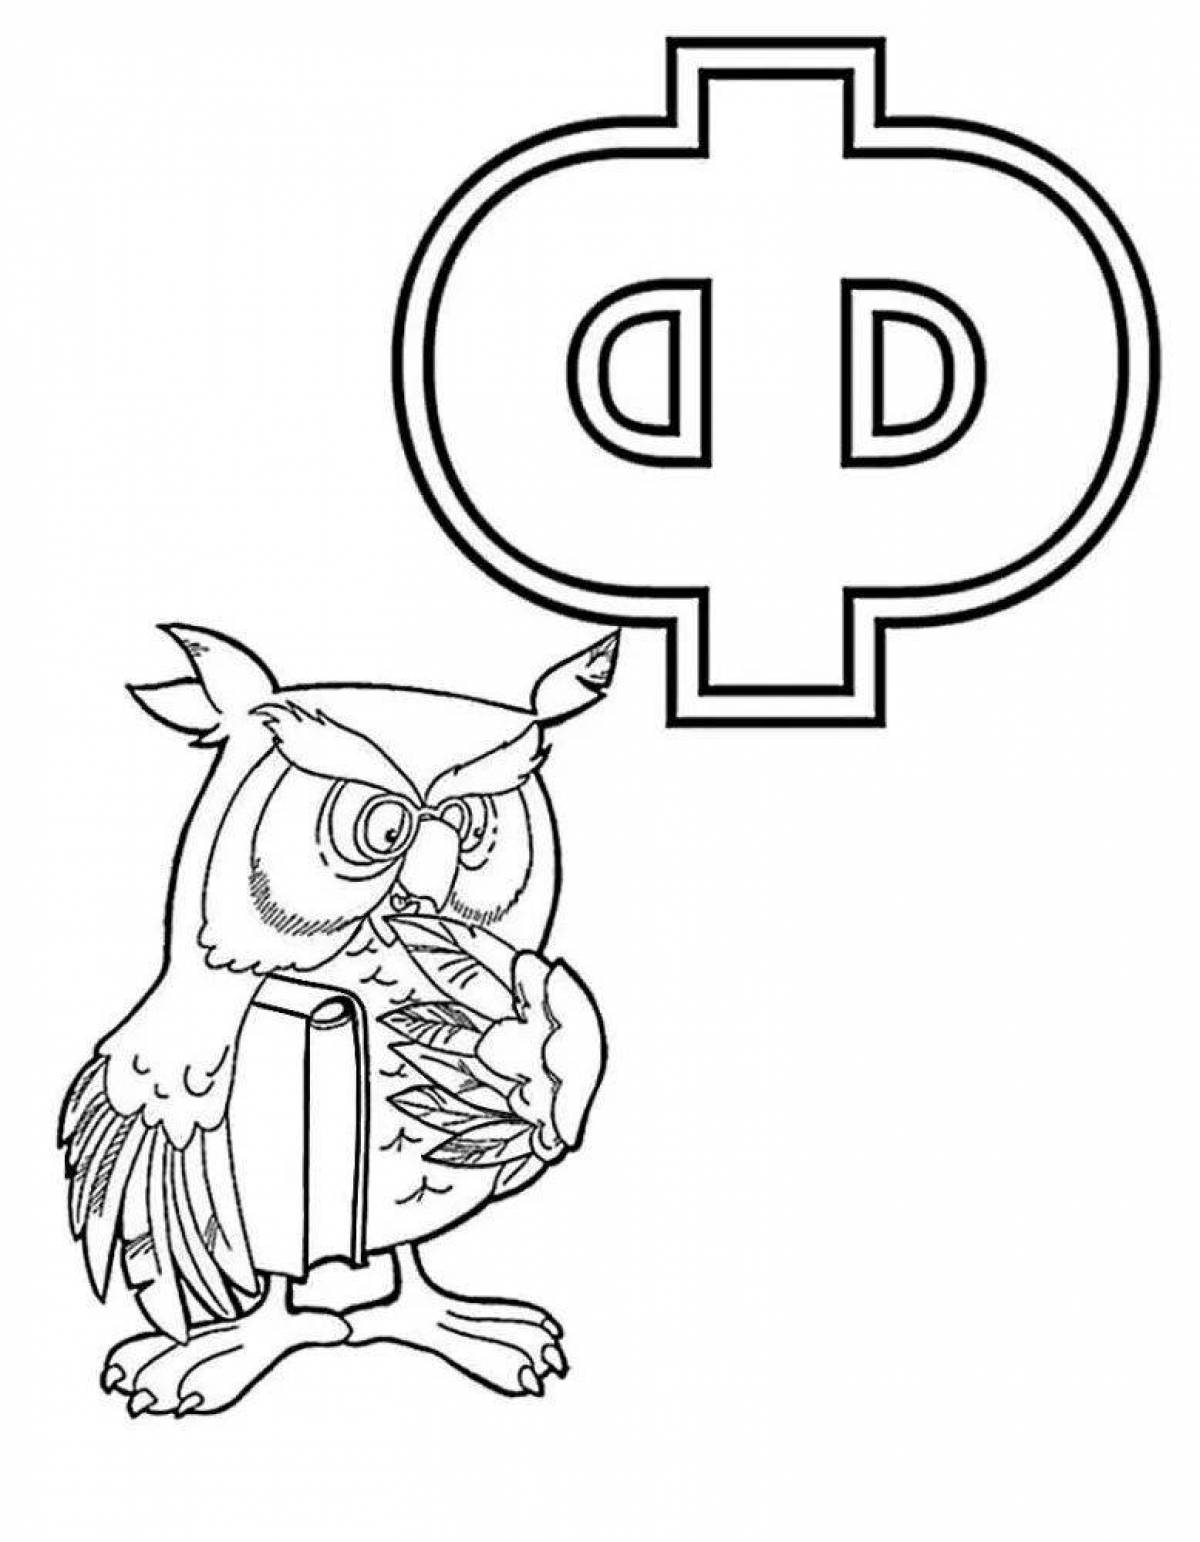 Colour letter f coloring page for juniors